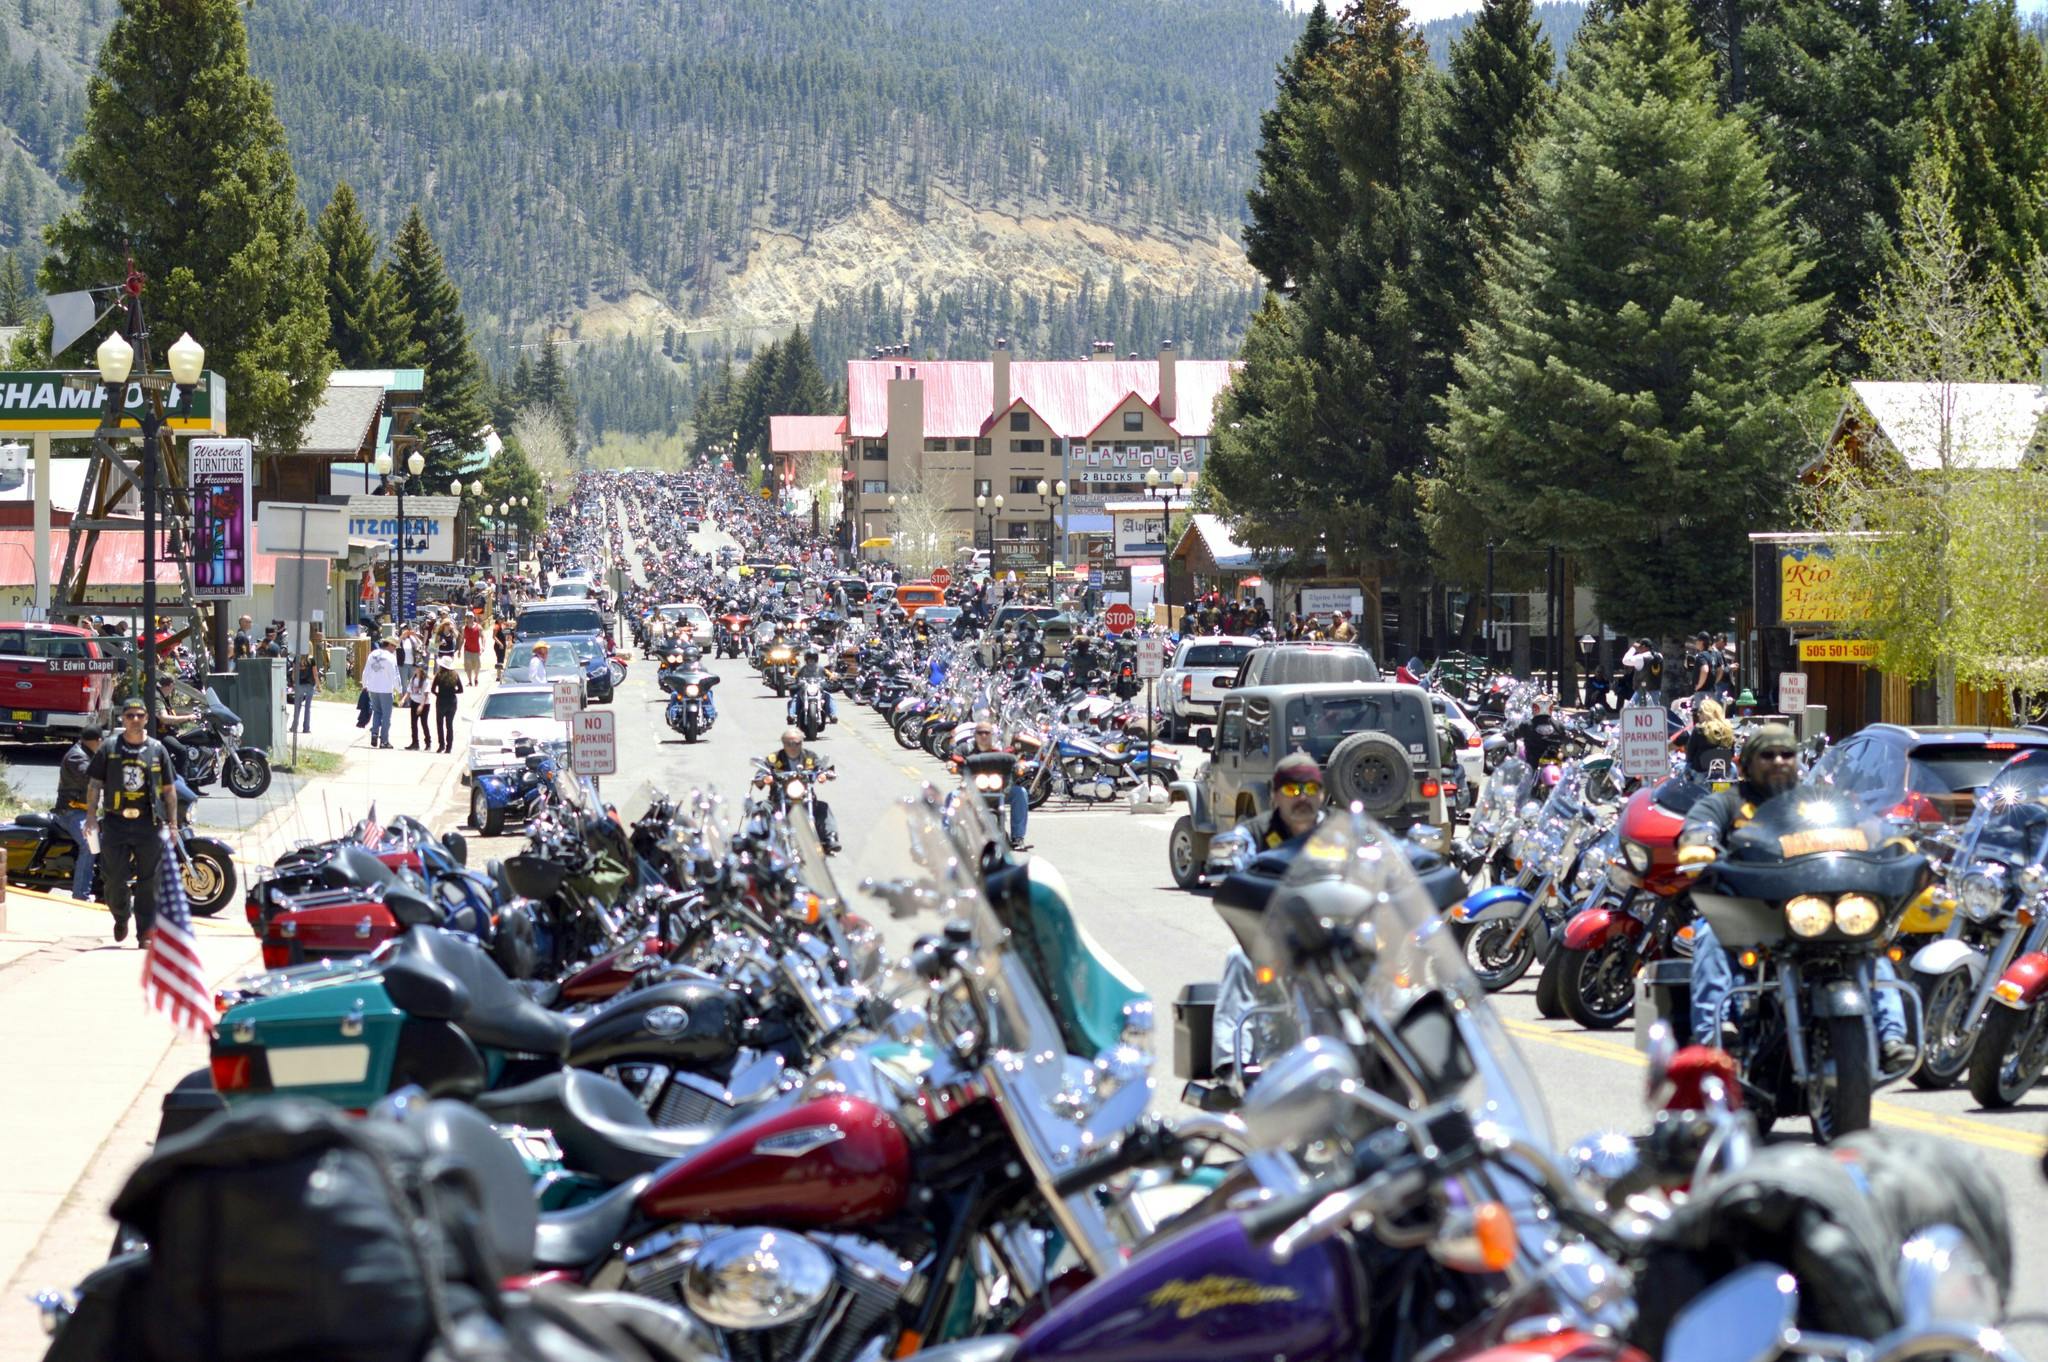 One crazy party at the red river memorial motorcycle